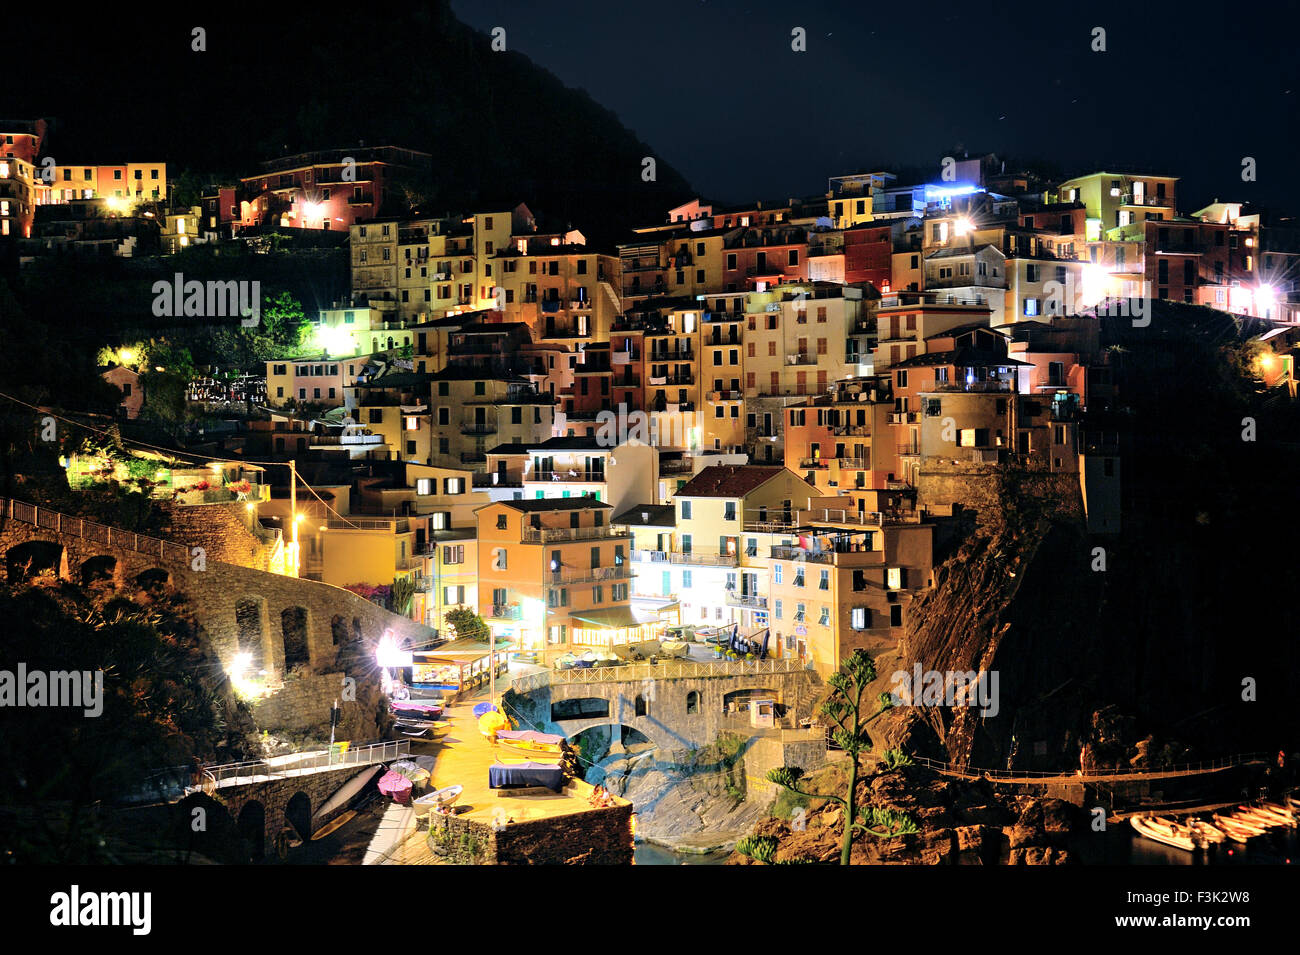 Colorful houses of Manarola at night, Village of Cinque Terre, Italy, night shot, nightscape with stars Stock Photo